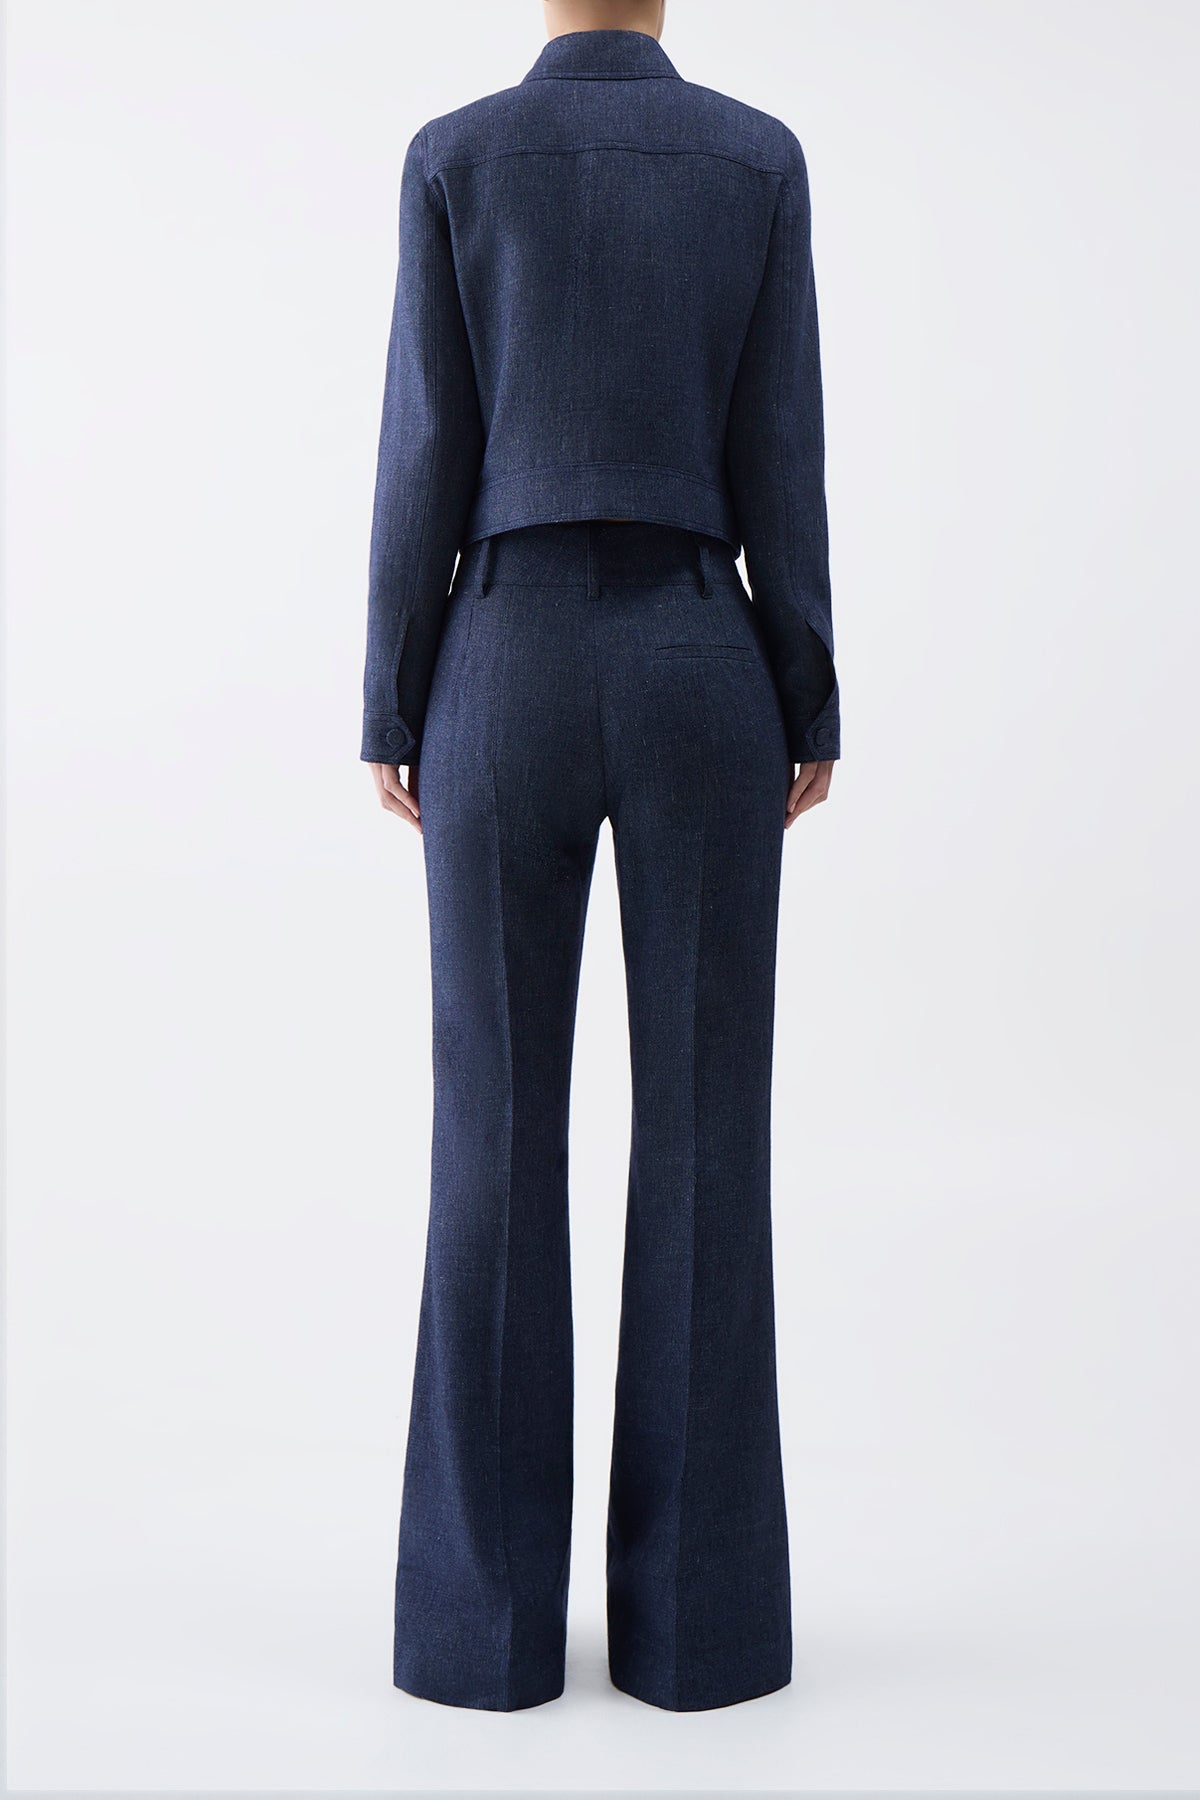 Thereza Jacket in Navy Wool Linen and Cashmere Silk